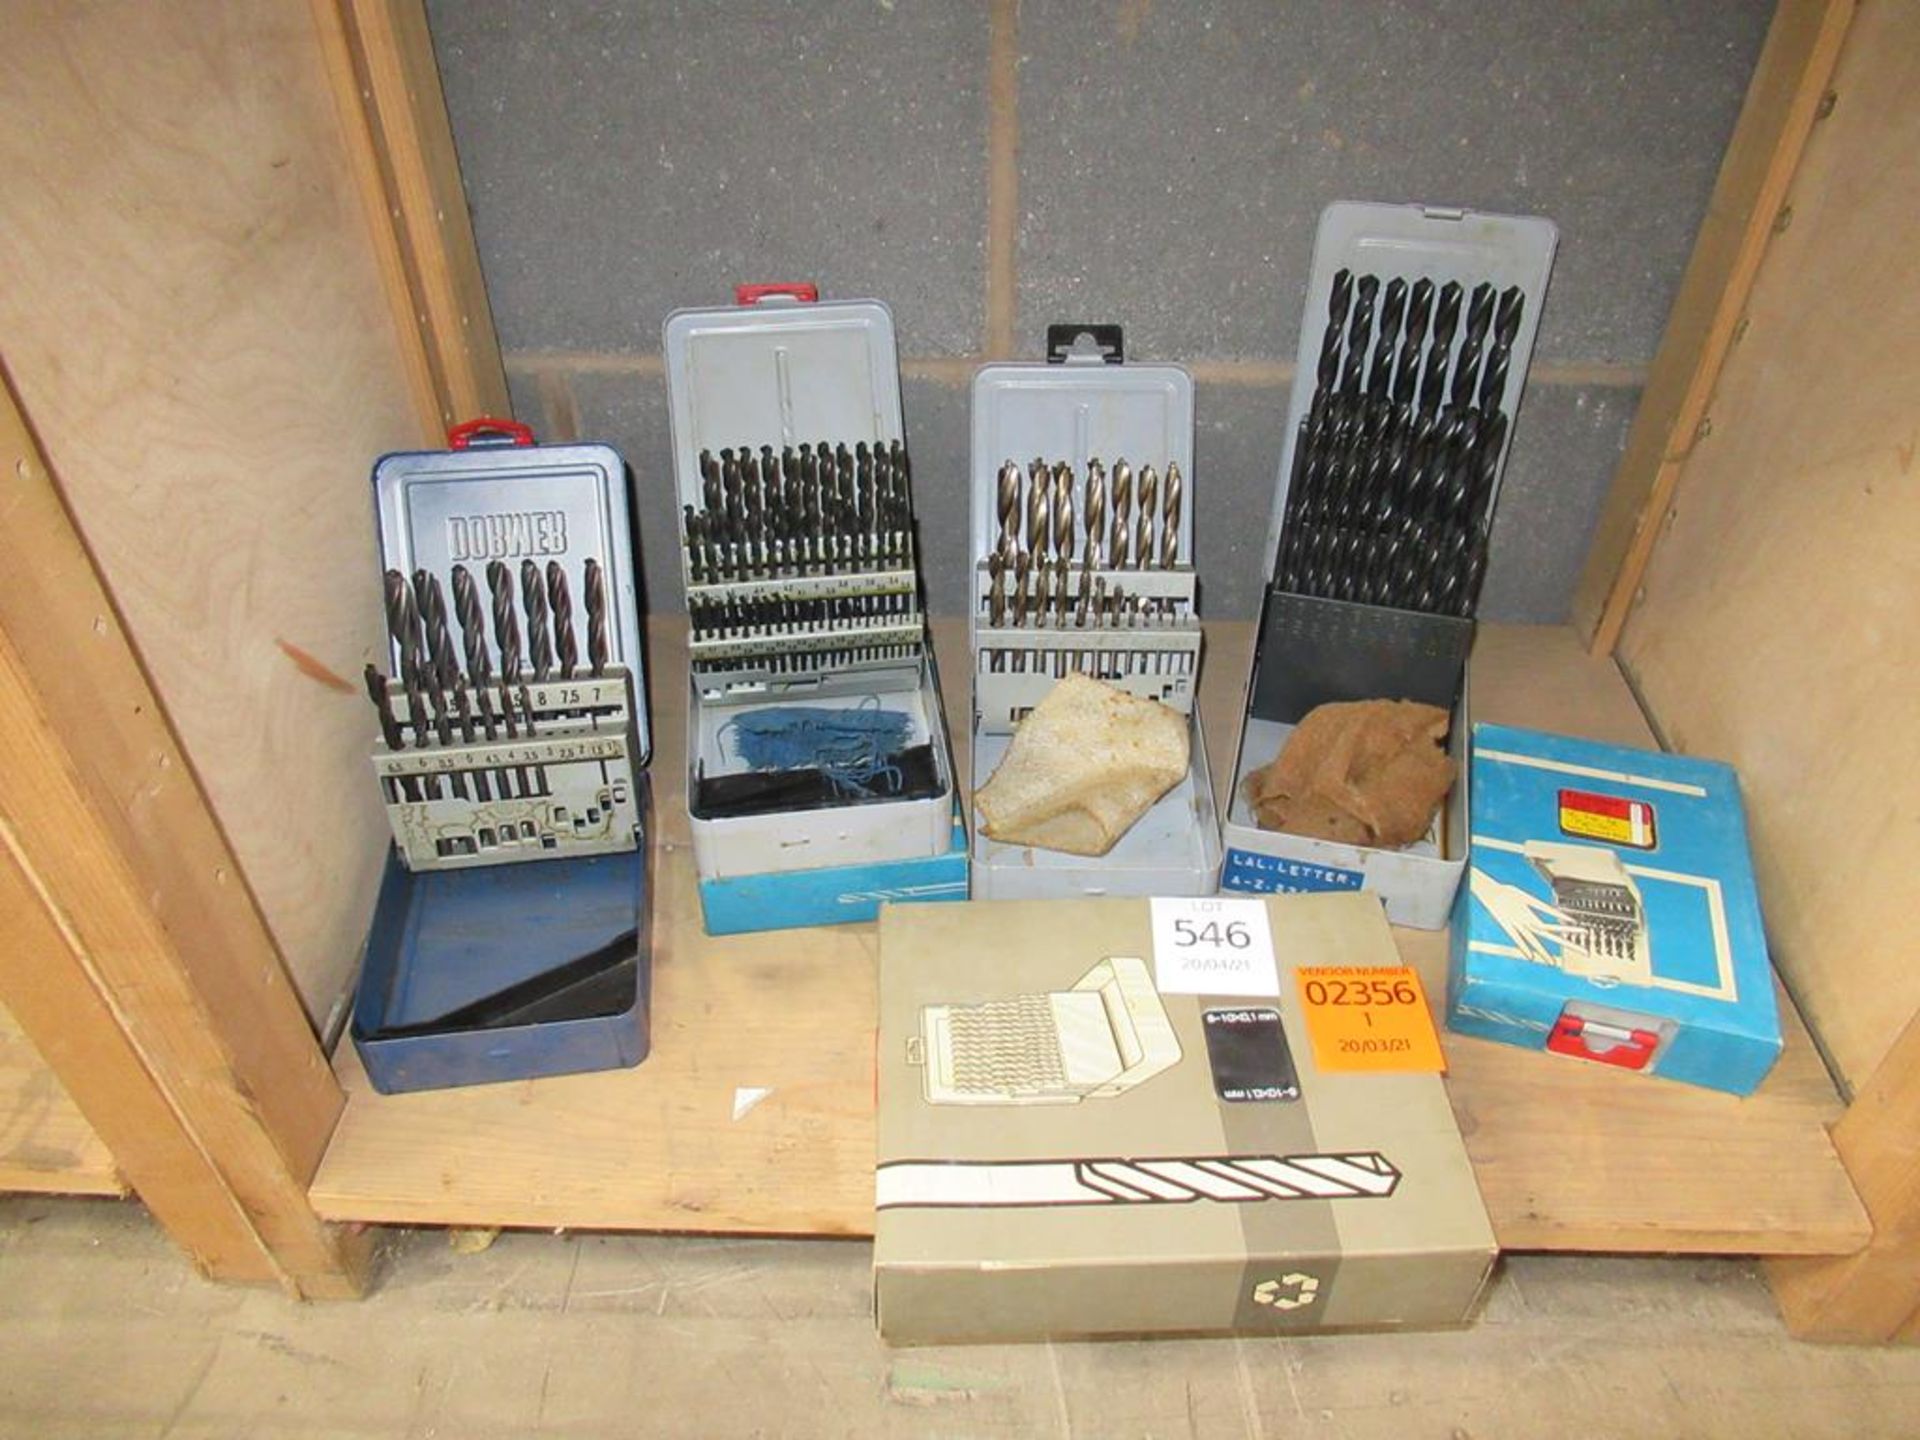 Shelf to contain various Dormer Drill Bits